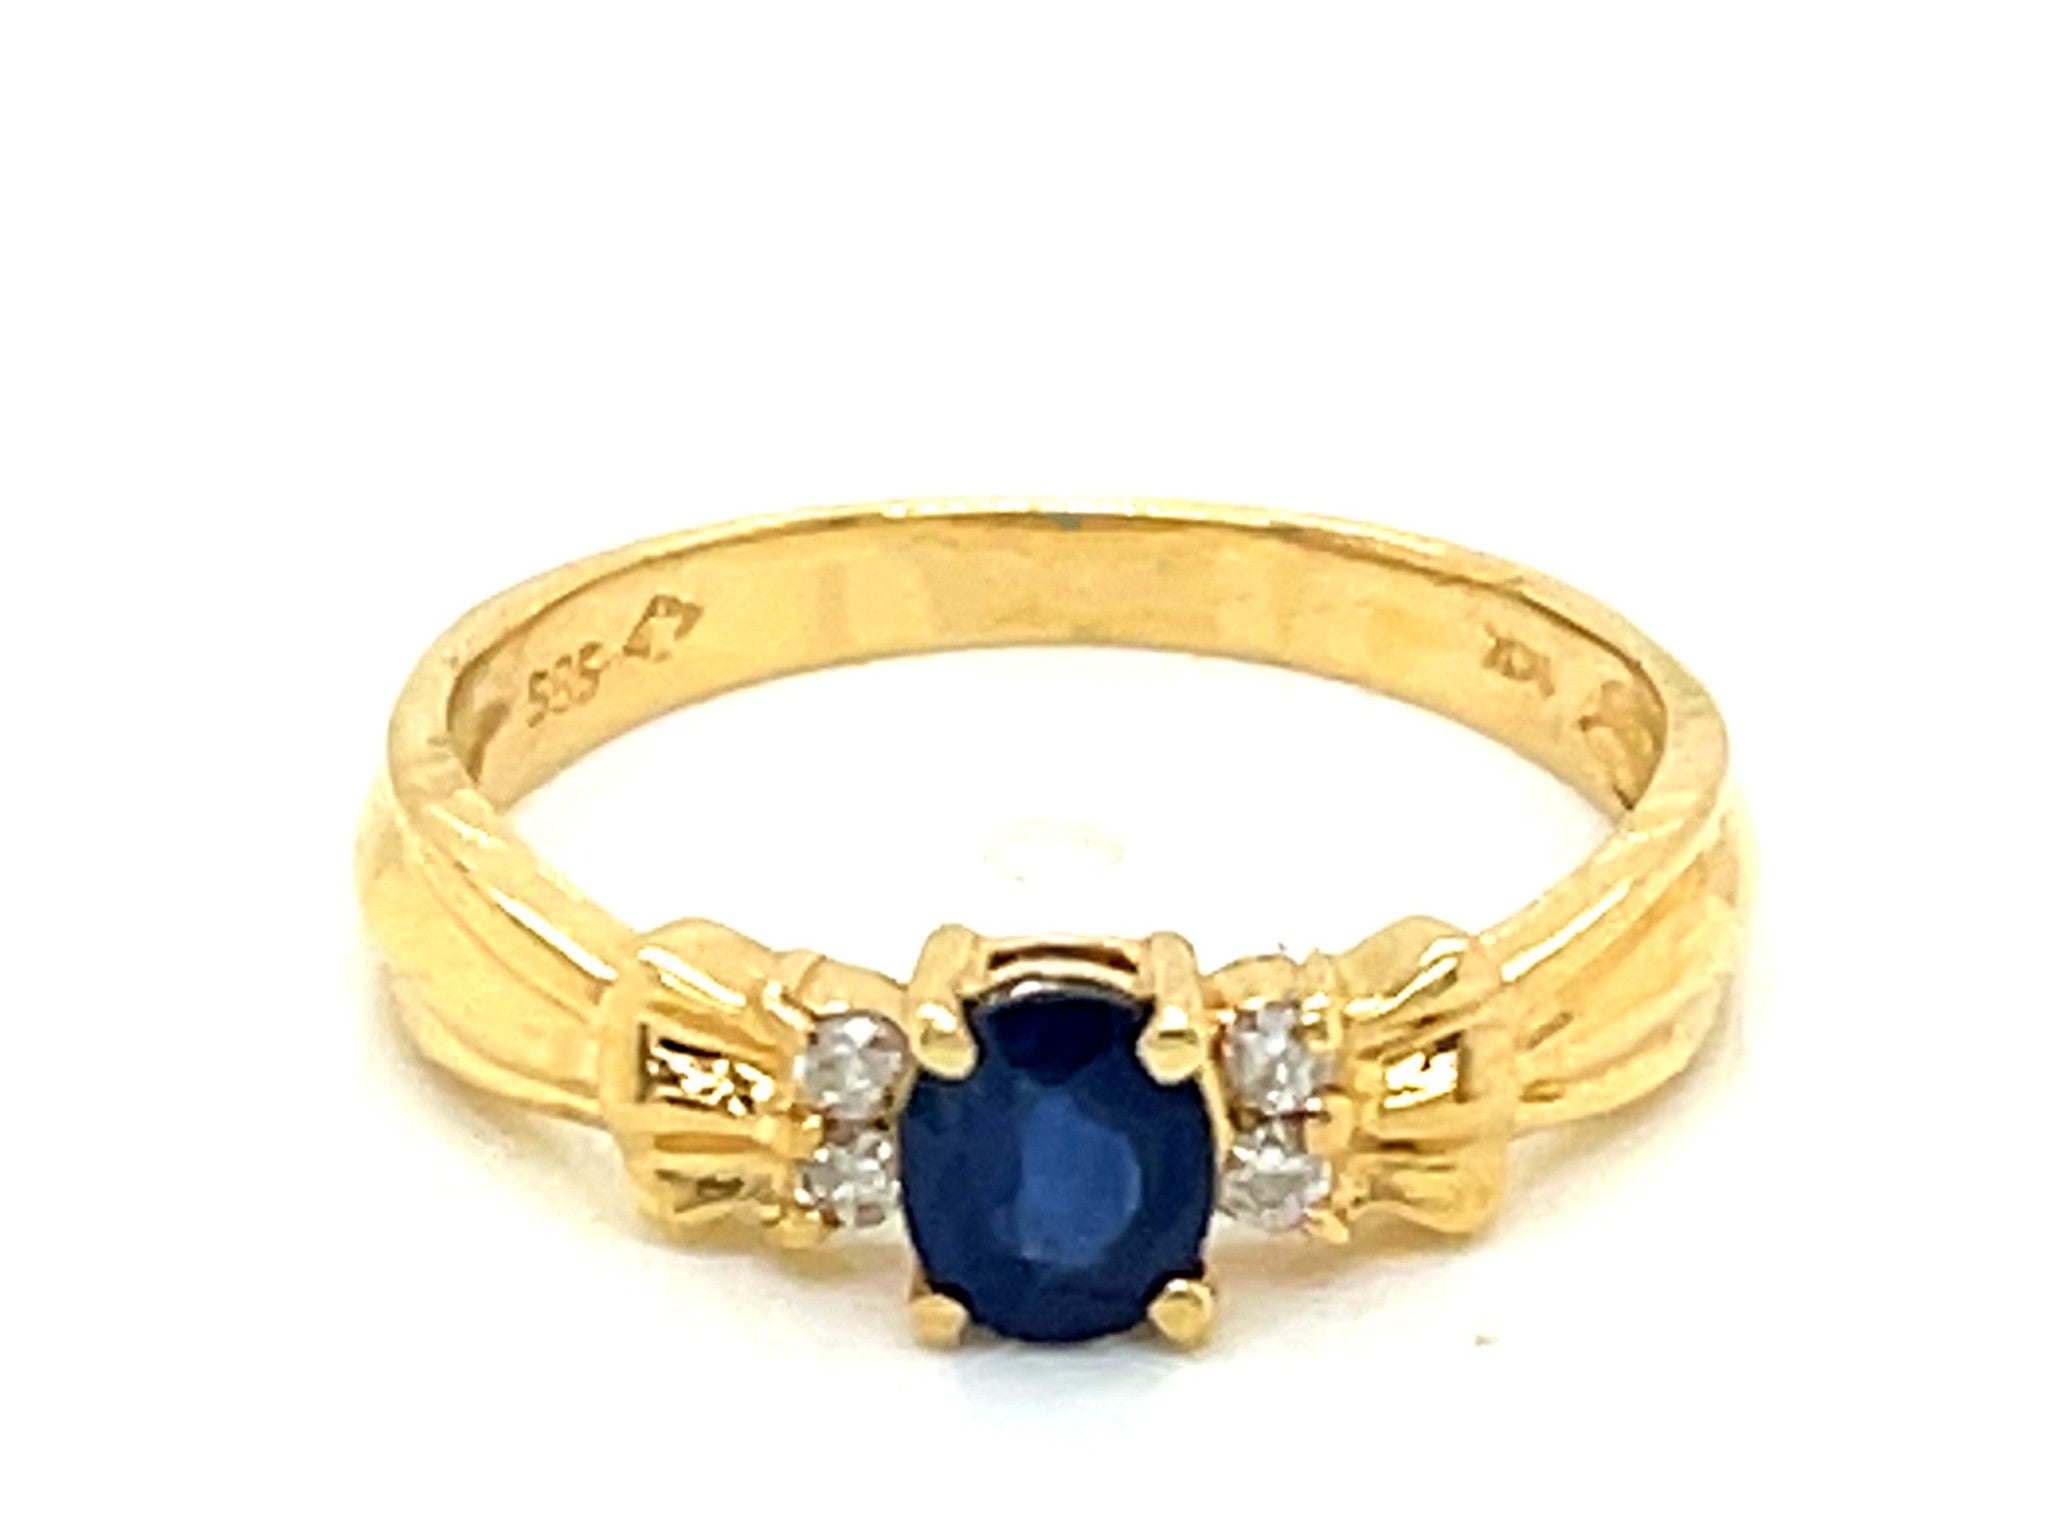 Blue Oval Sapphire and Diamond Stackable Ring in 14k Yellow Gold